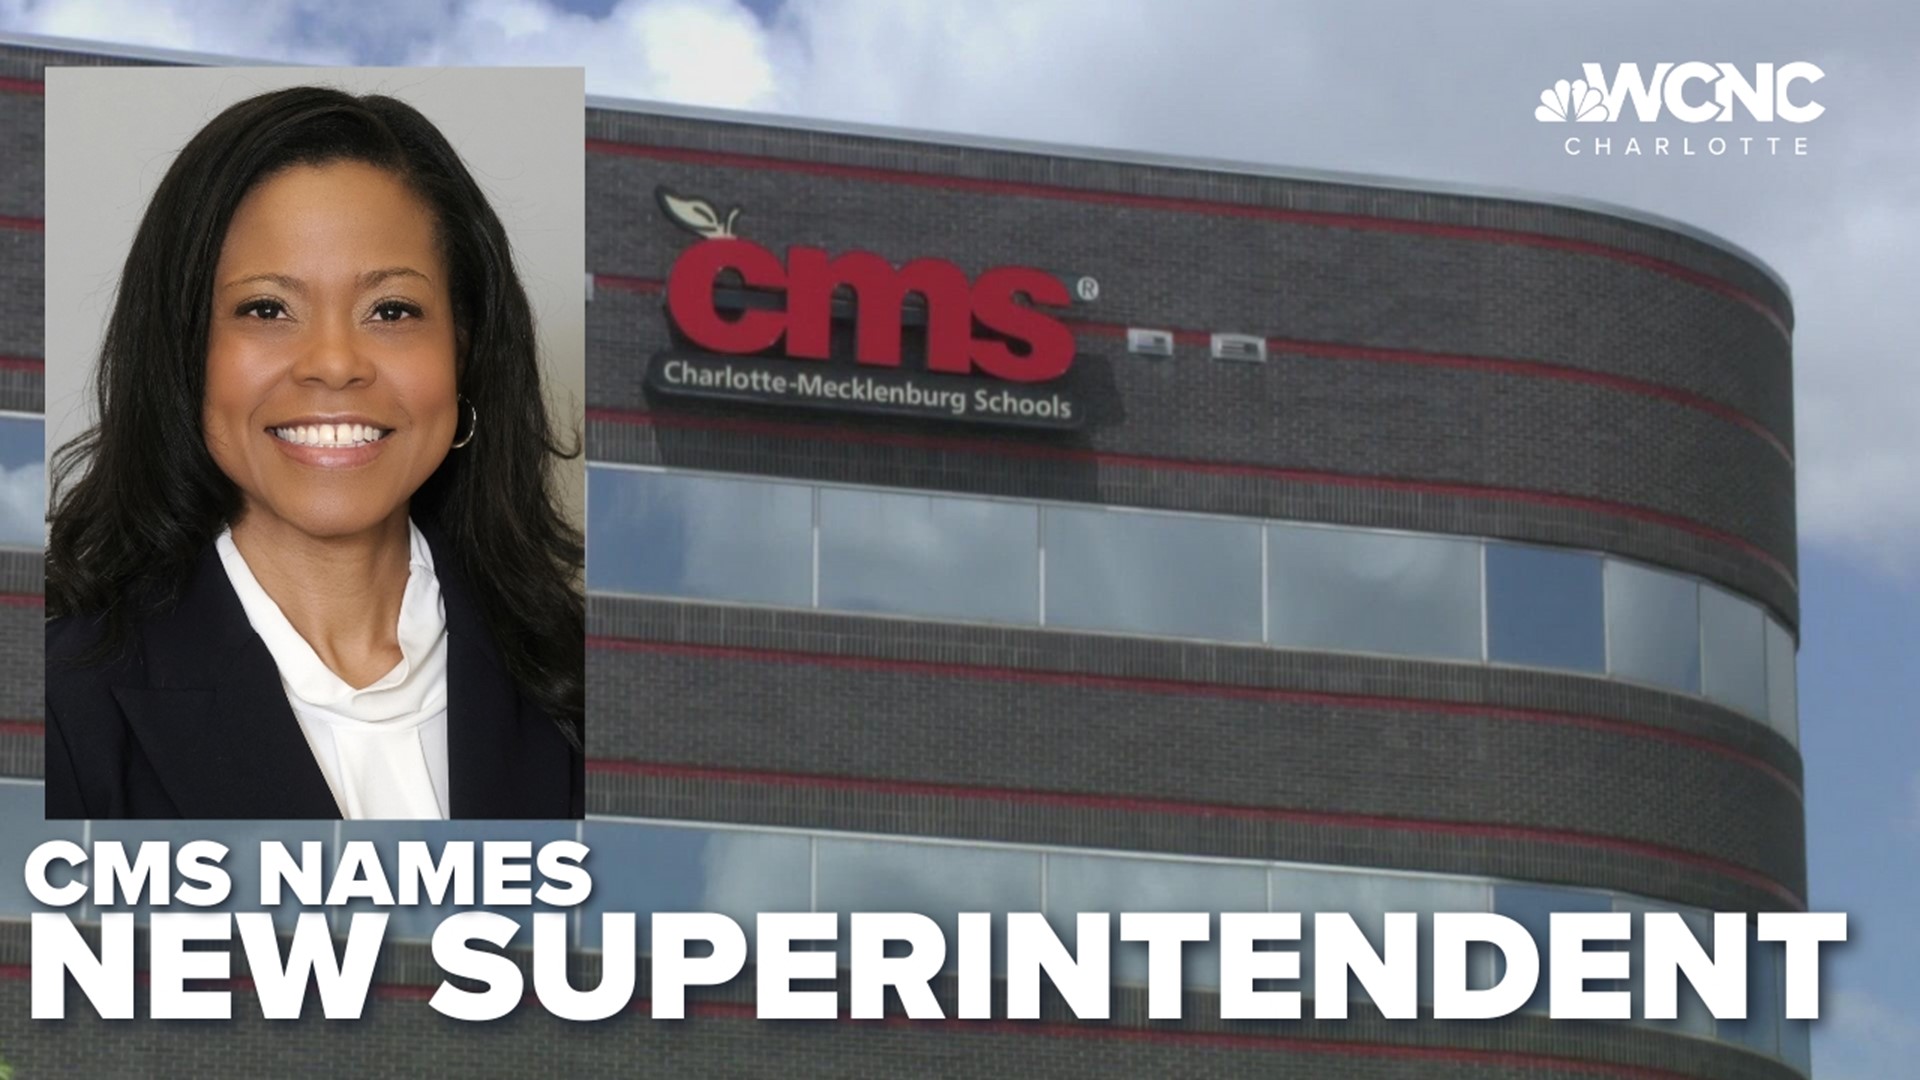 CMS is making history, hiring its first Black female superintendent of schools